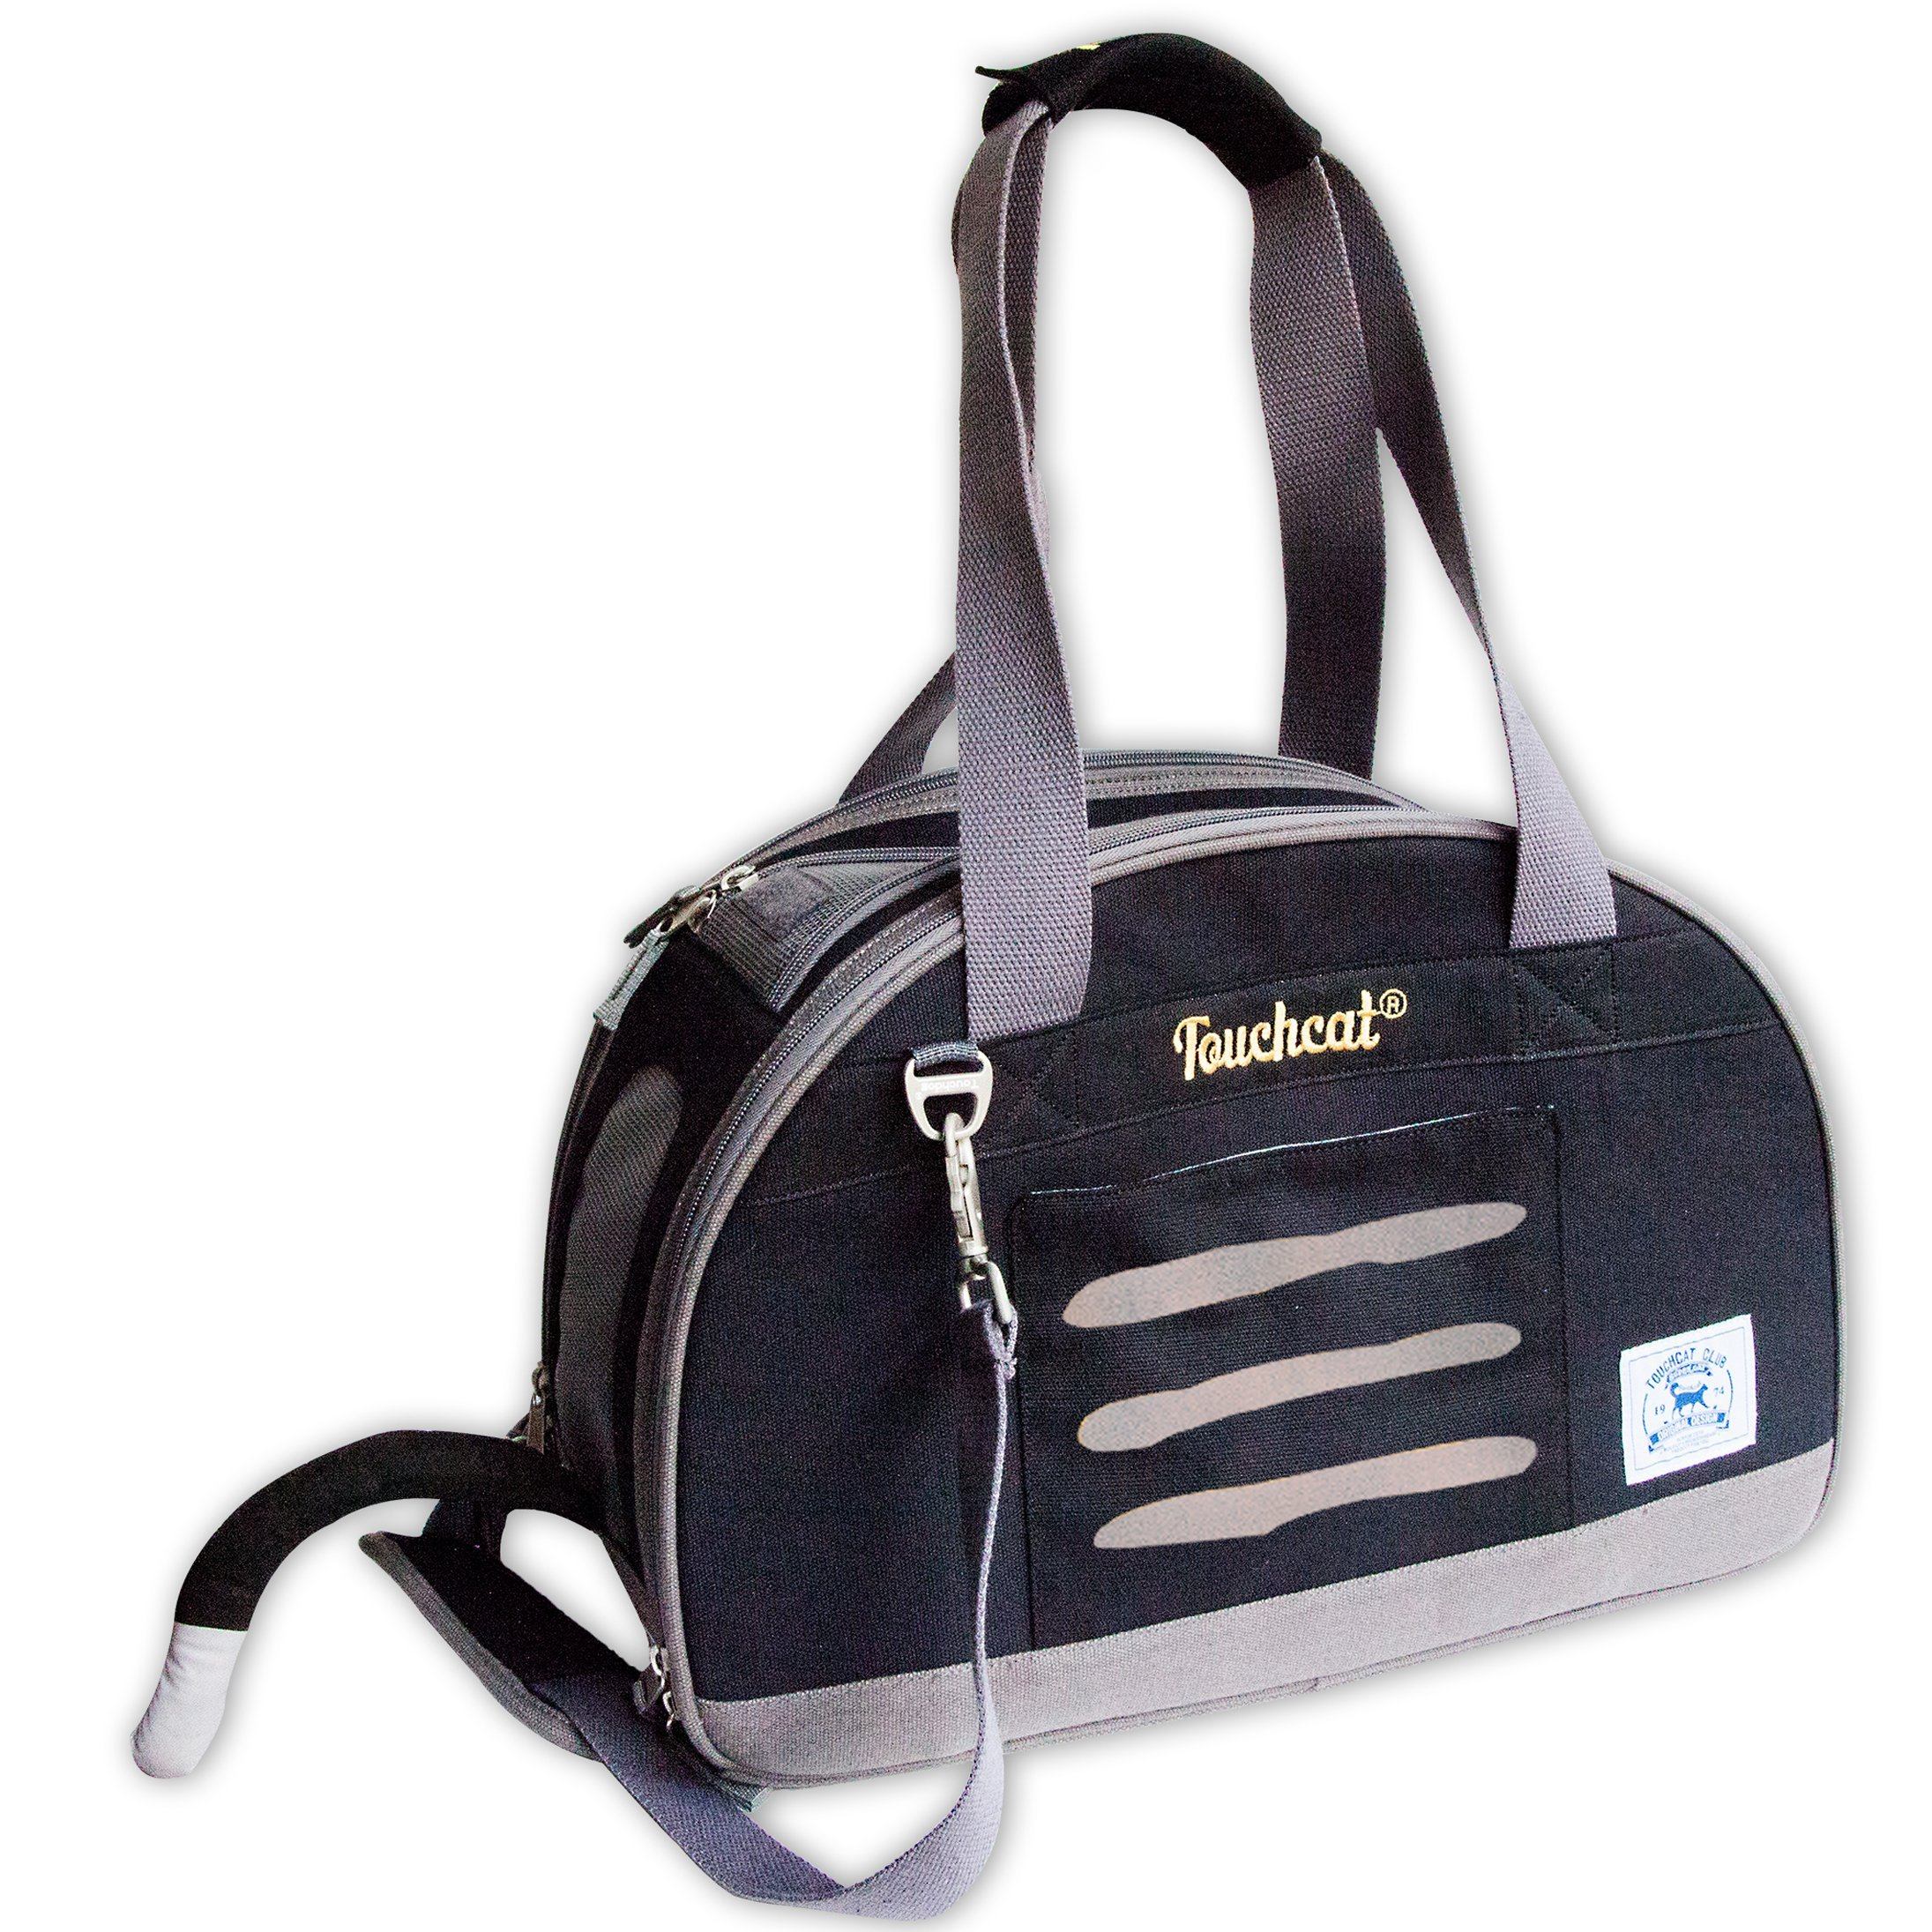 Touchcat 'Tote-Tails' Designer Airline Approved Collapsible Cat Carrier Black 